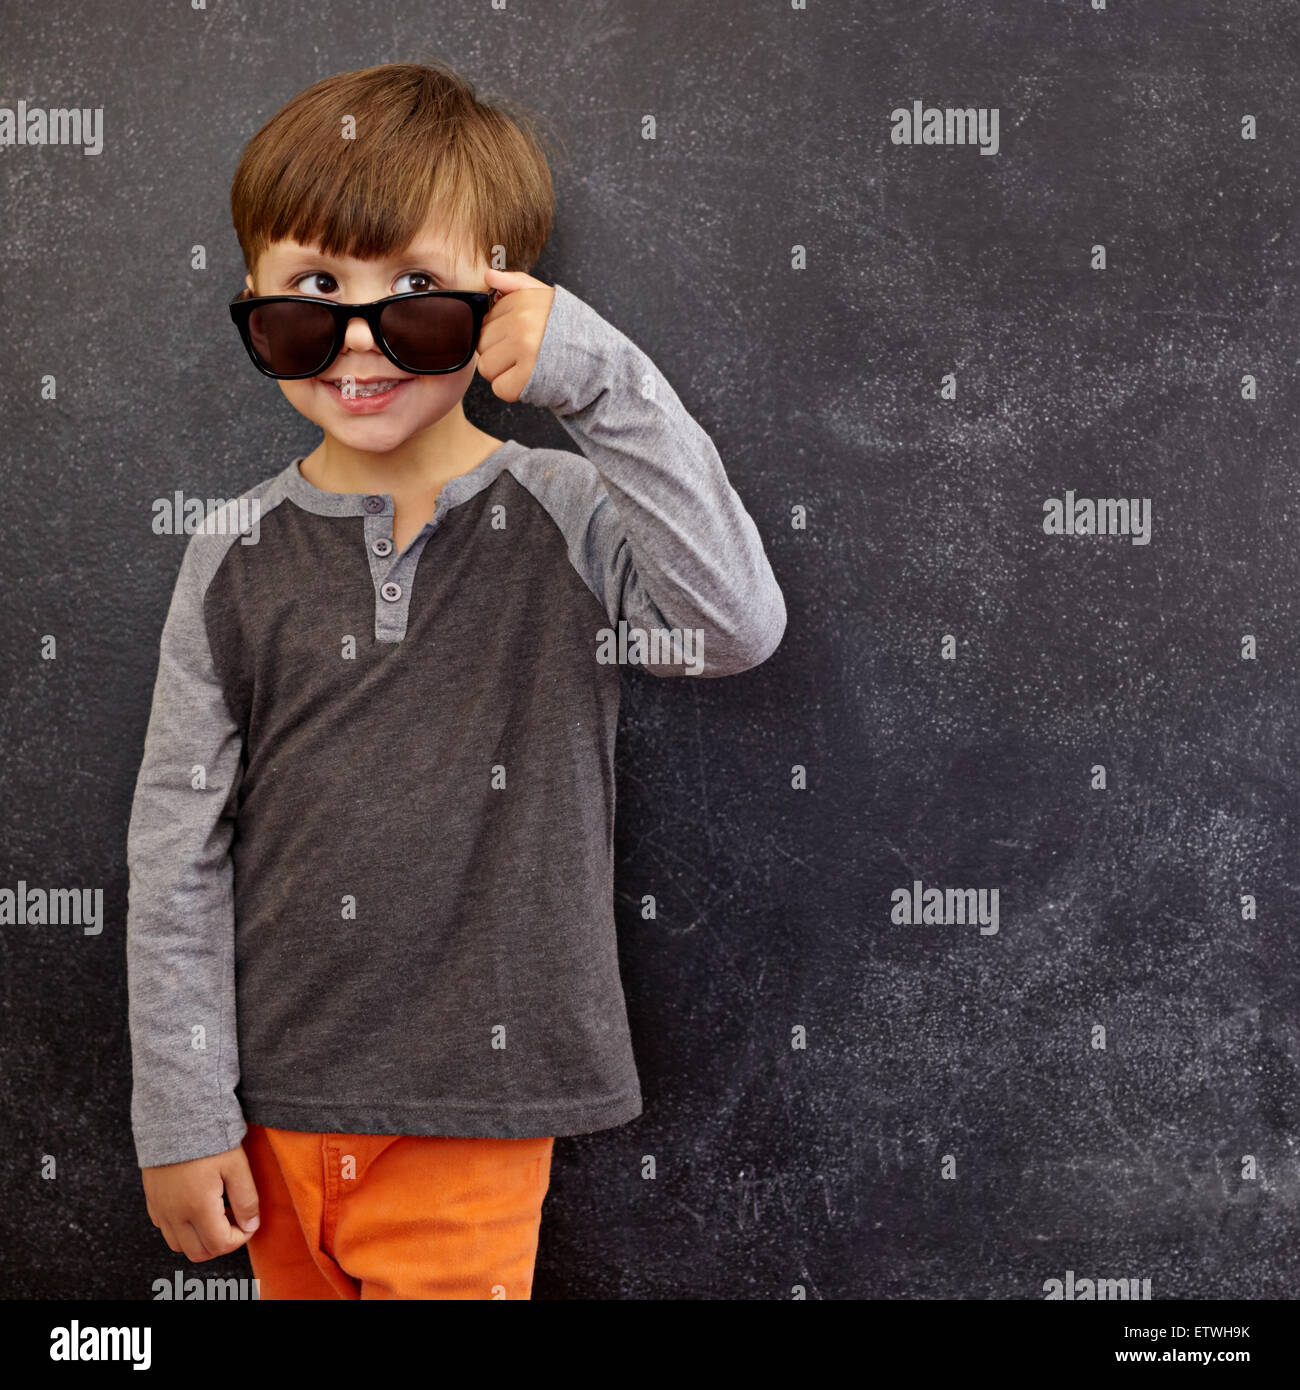 Portrait of a little boy in sunglasses looking at away at copy space. Cool boy peering over his sunglasses against blackboard. Stock Photo